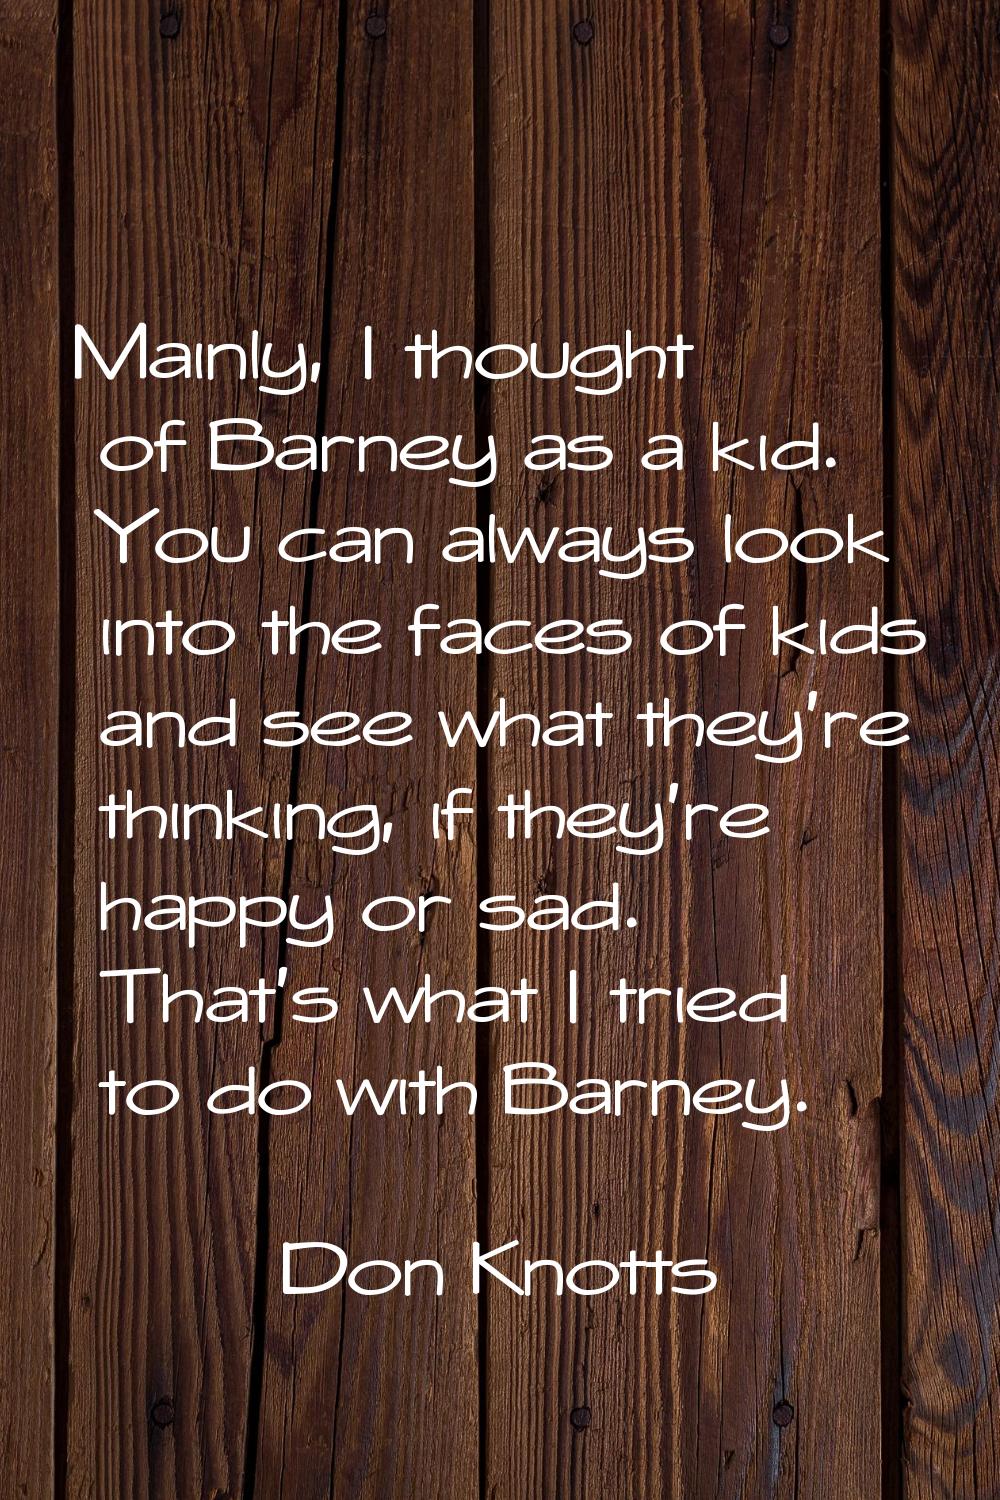 Mainly, I thought of Barney as a kid. You can always look into the faces of kids and see what they'